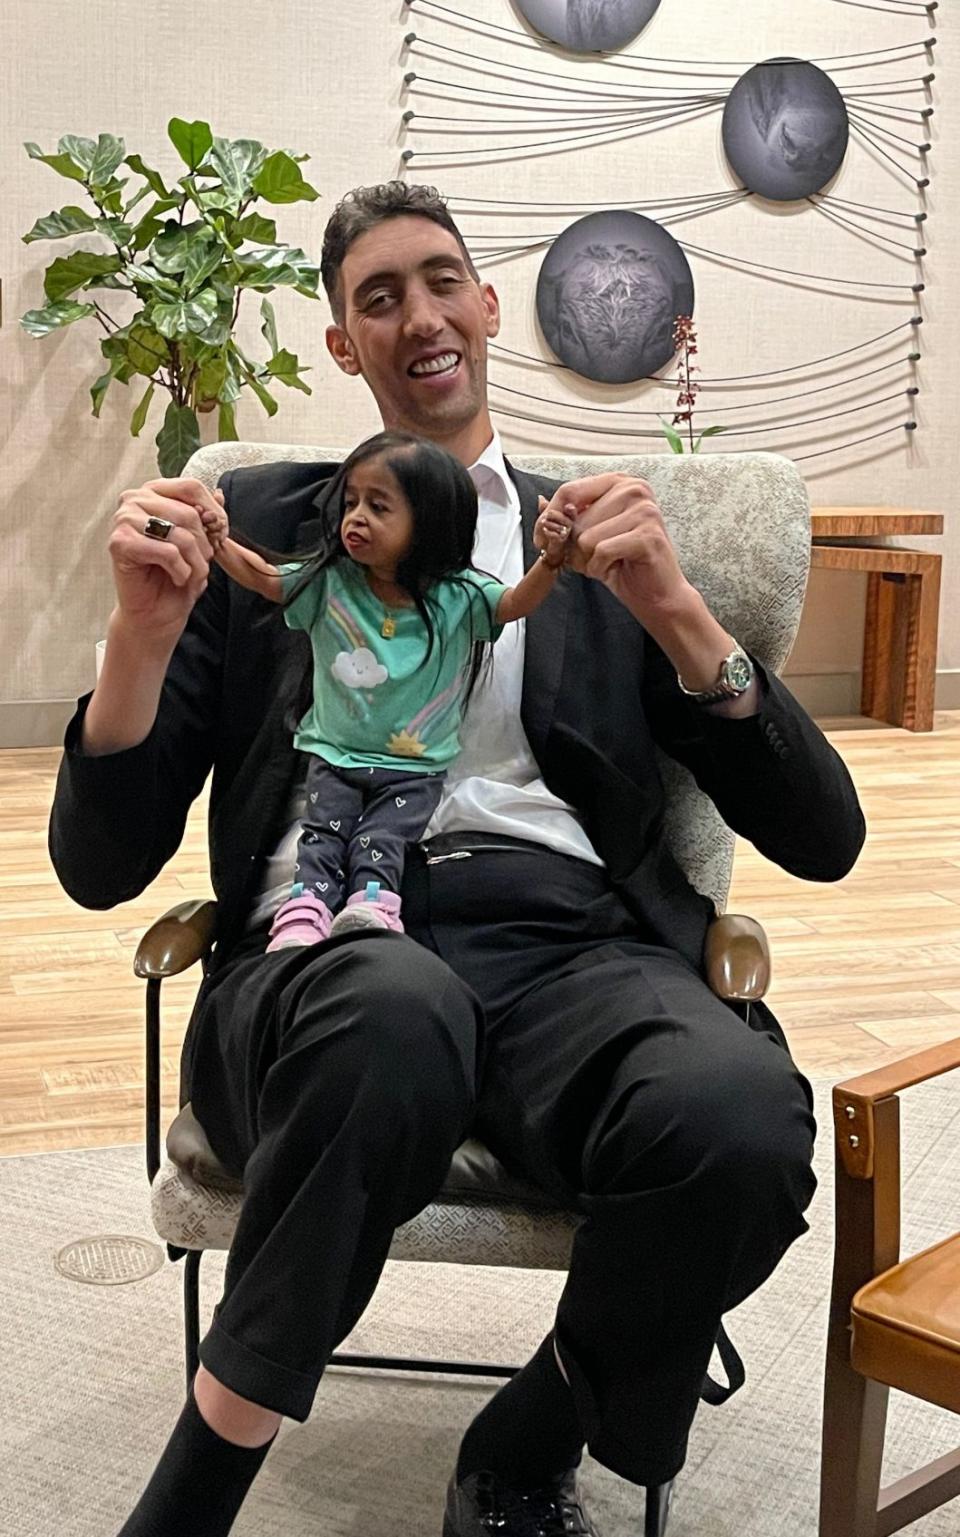 The tallest living man in the world Sultan Kosen, who stands at 251 cm (8 ft 2.82) meets Jyoti Amge